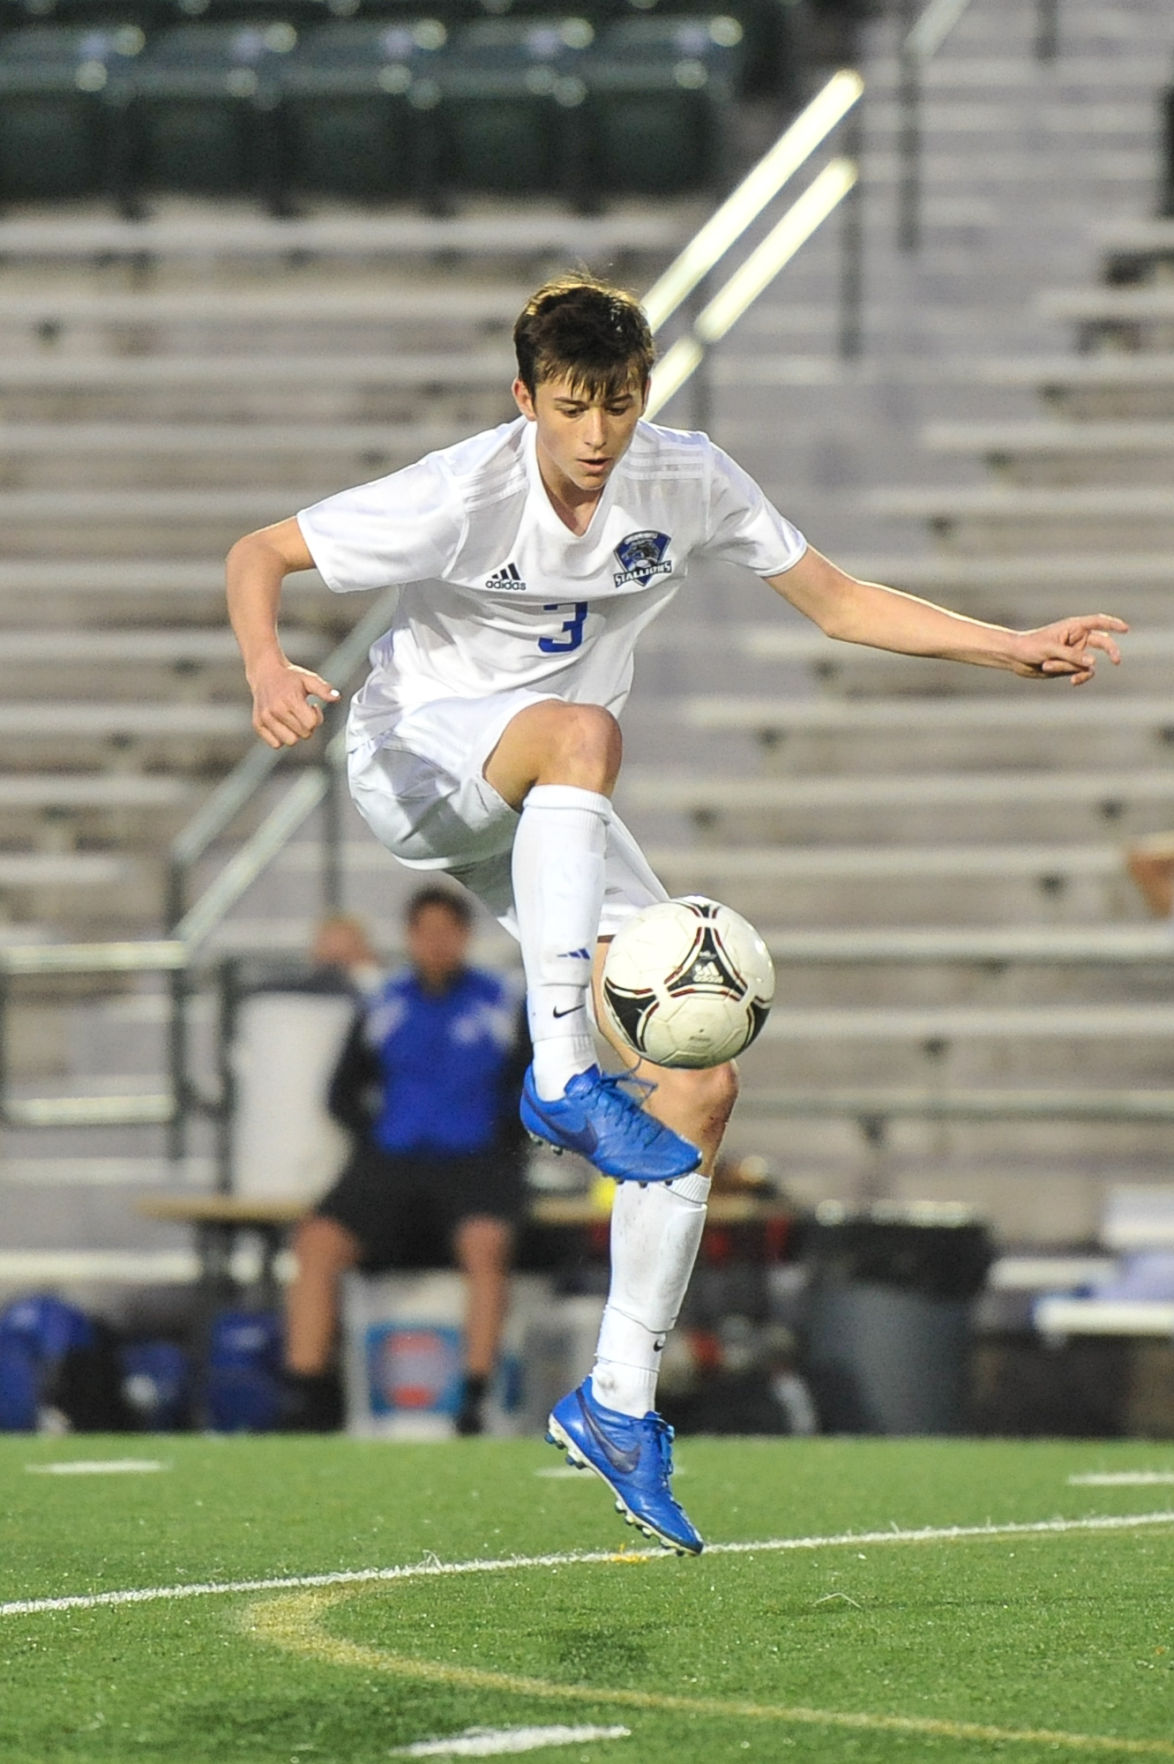 Mesquite ISD Boys Soccer Roundup: Host North Mesquite defends home turf ...